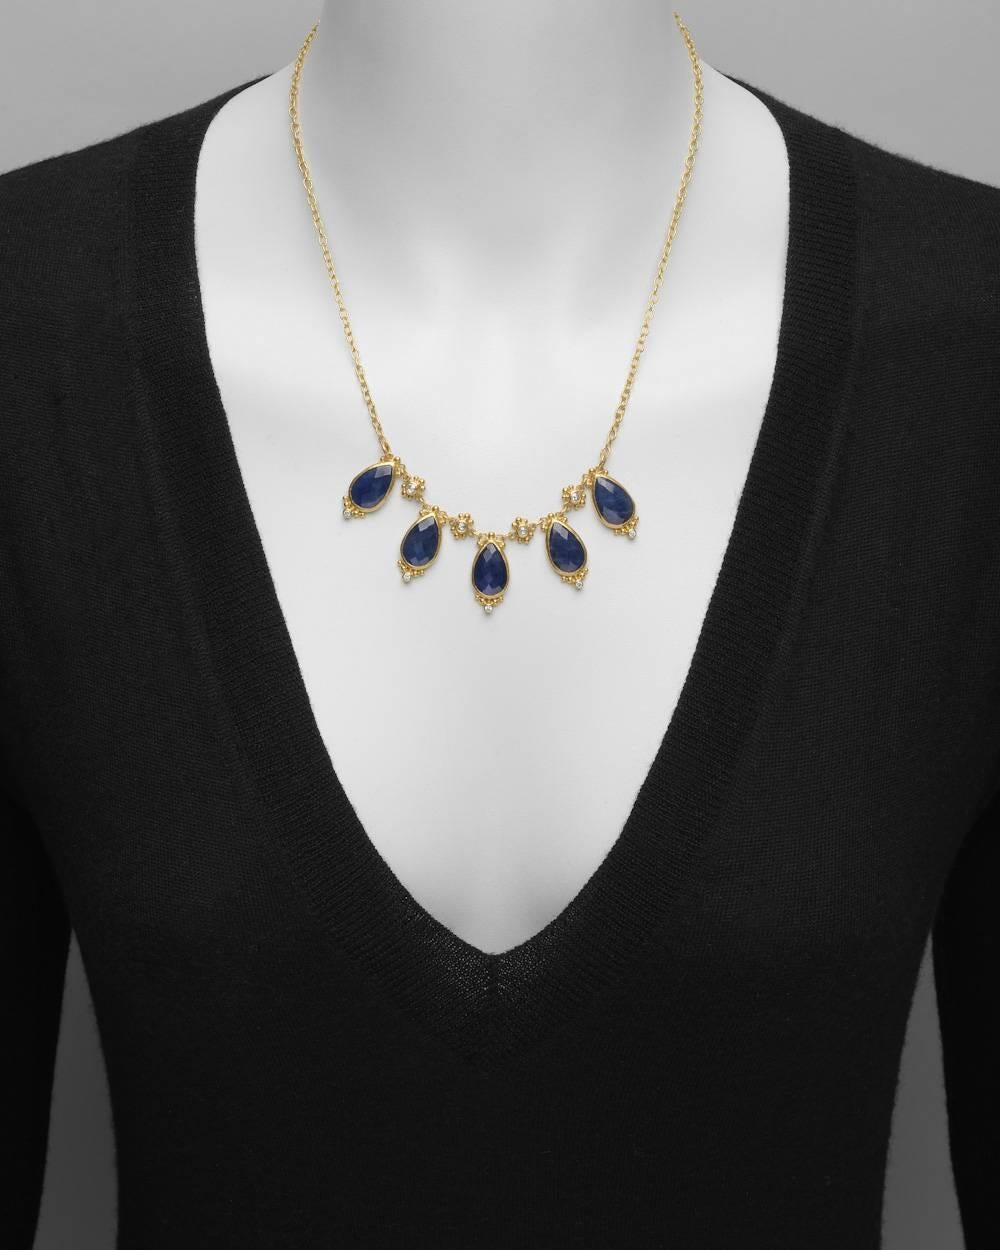 "Elements" sapphire fringe necklace, with five pear-shaped faceted sapphires suspended from a gold link chain with round brilliant-cut diamond accents, in 24k and 22k yellow gold, signed Gurhan. Sapphires weighing approximately 25.35 total